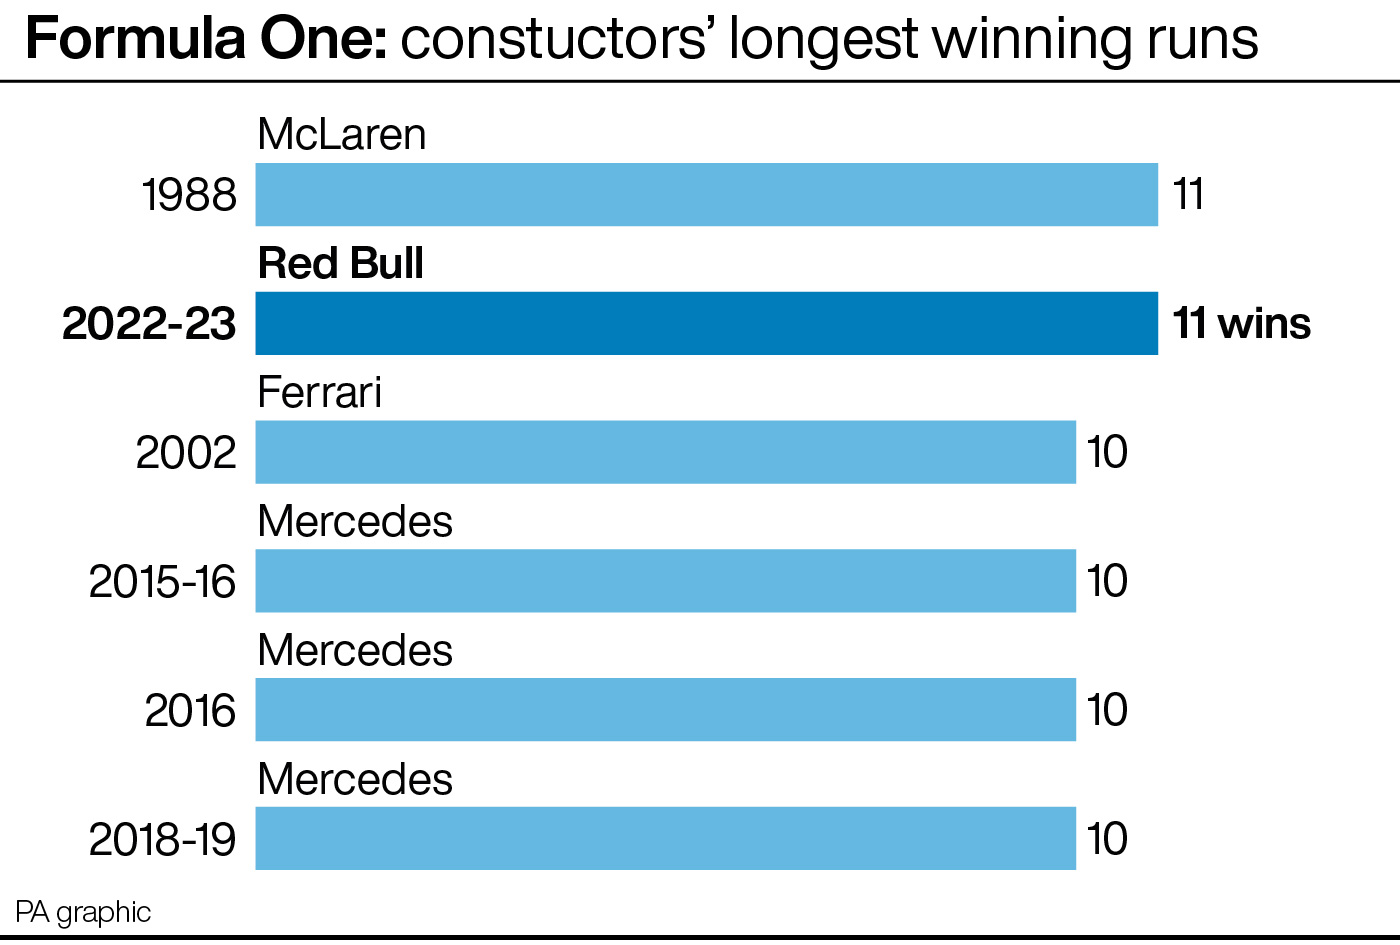 Formula One: longest winning runs by a single constructor (graphic)